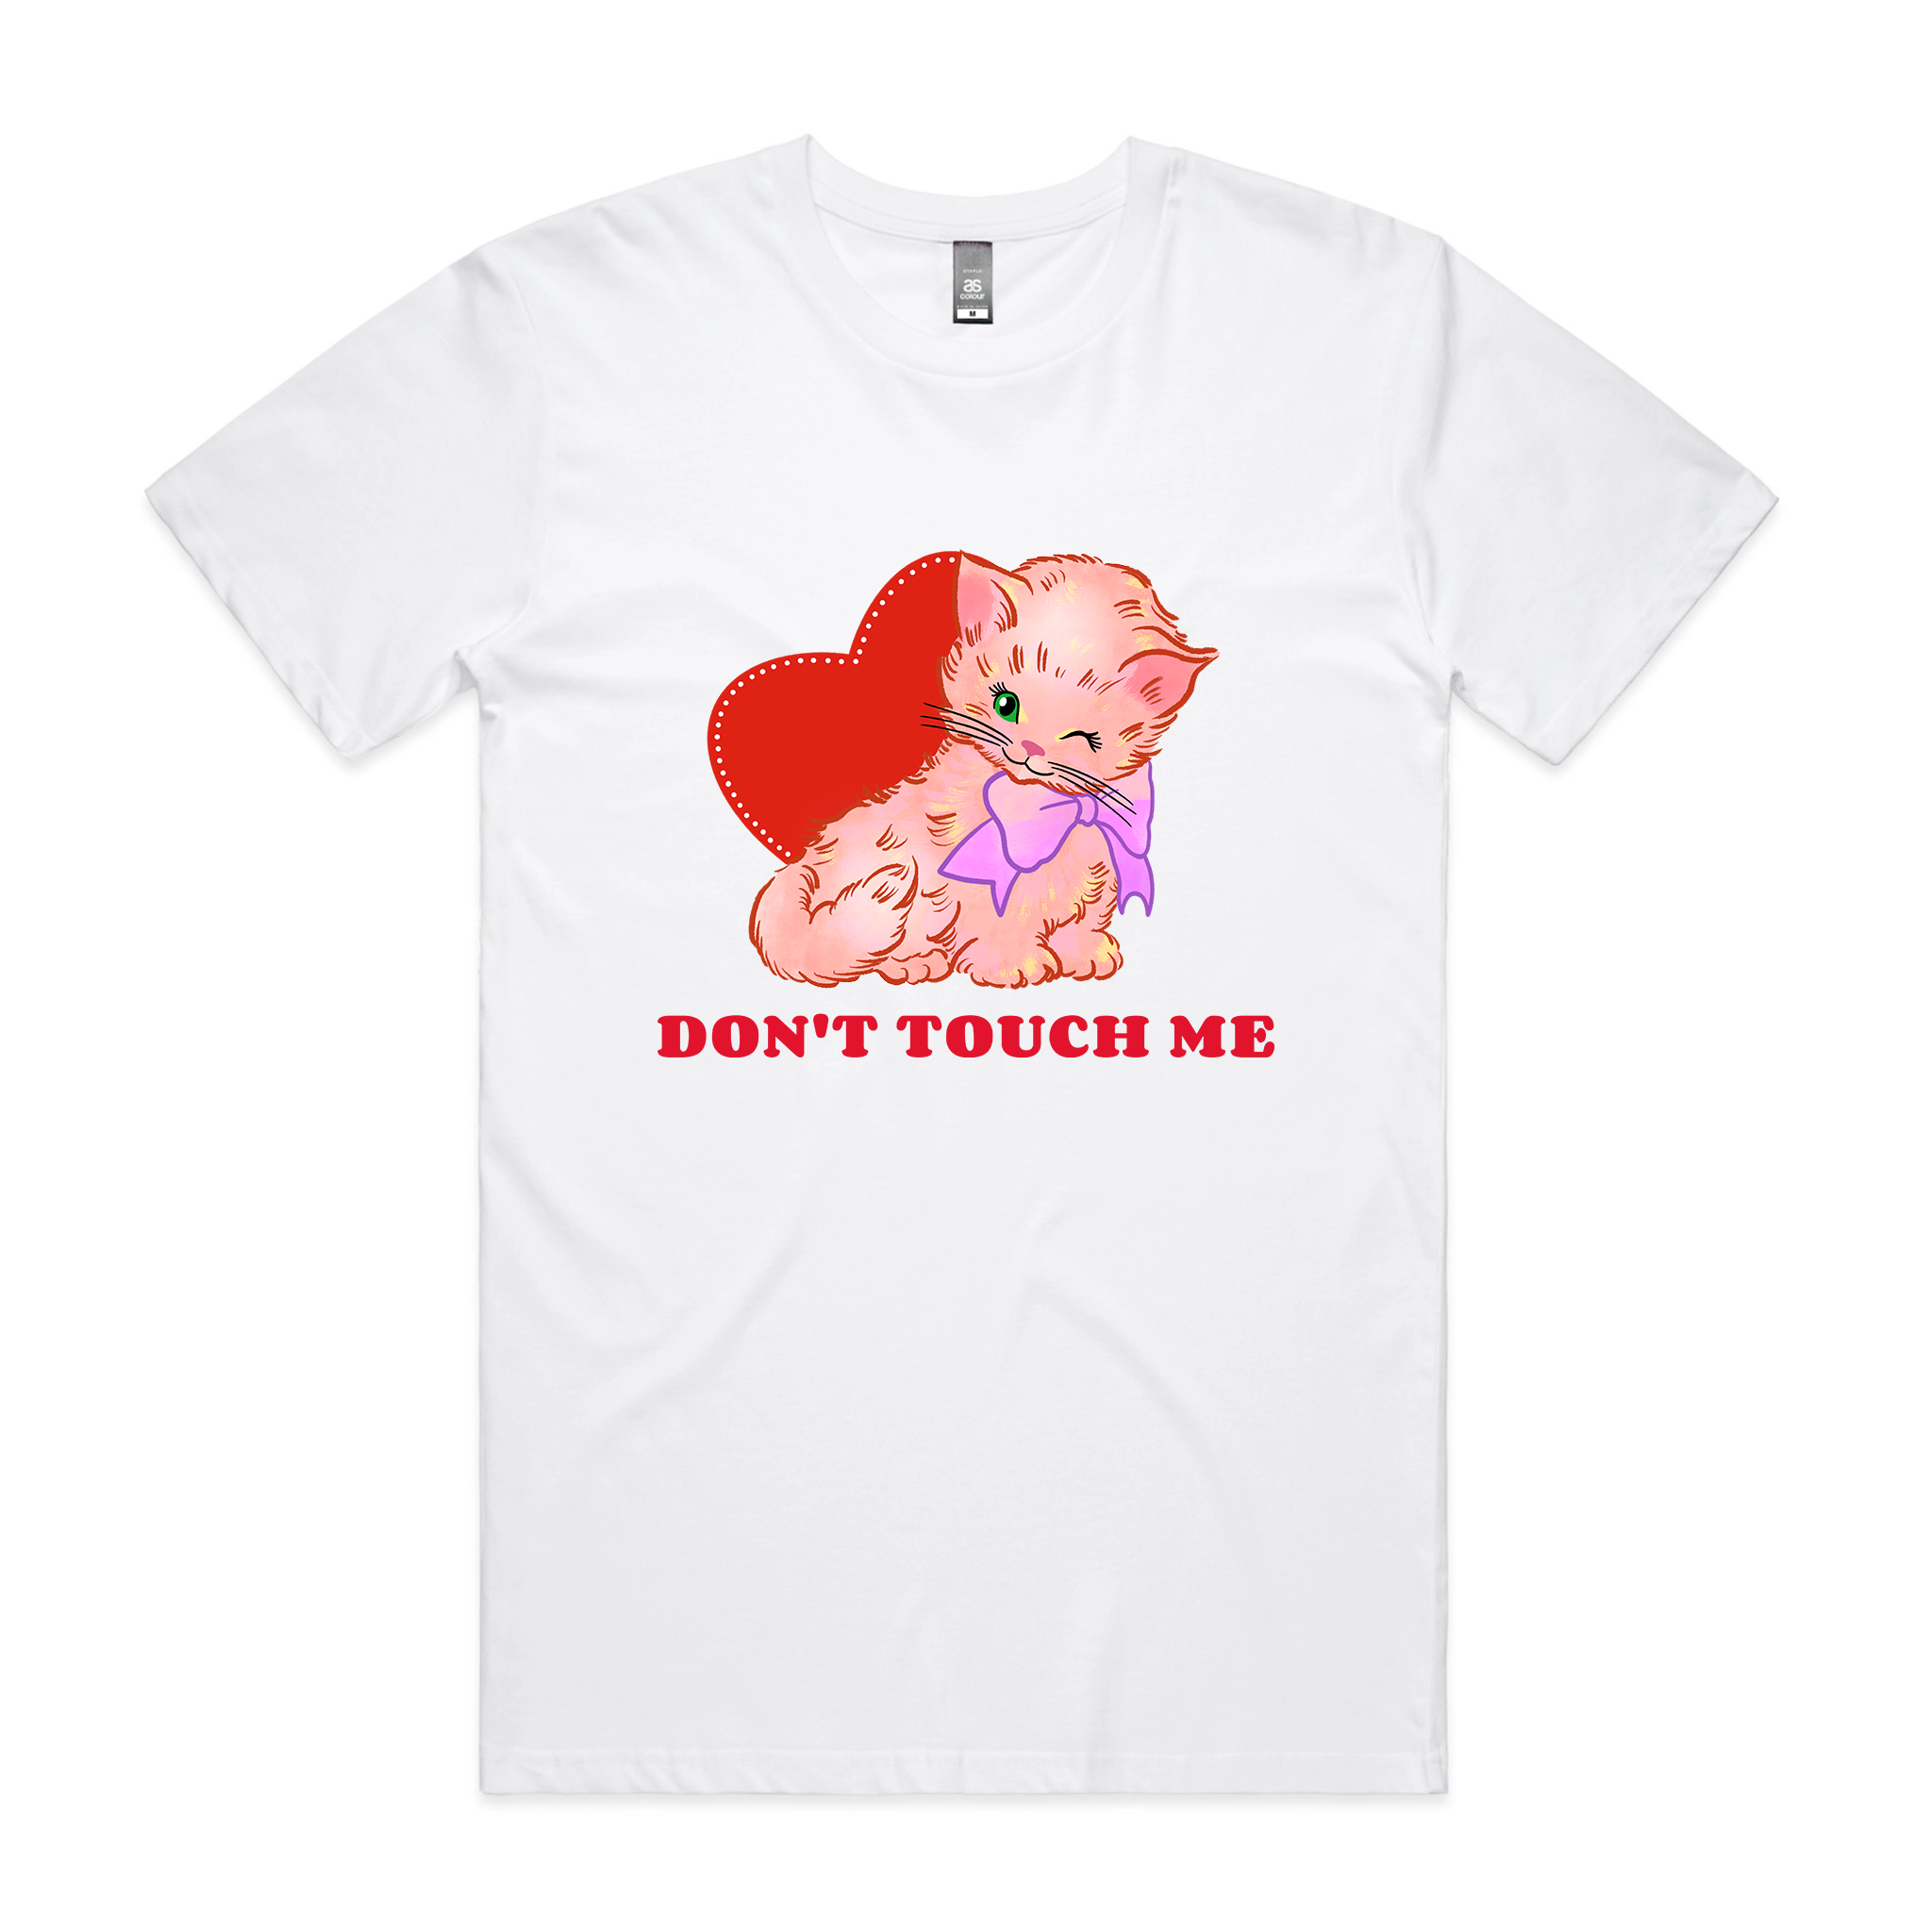 Don't Touch Me Tee